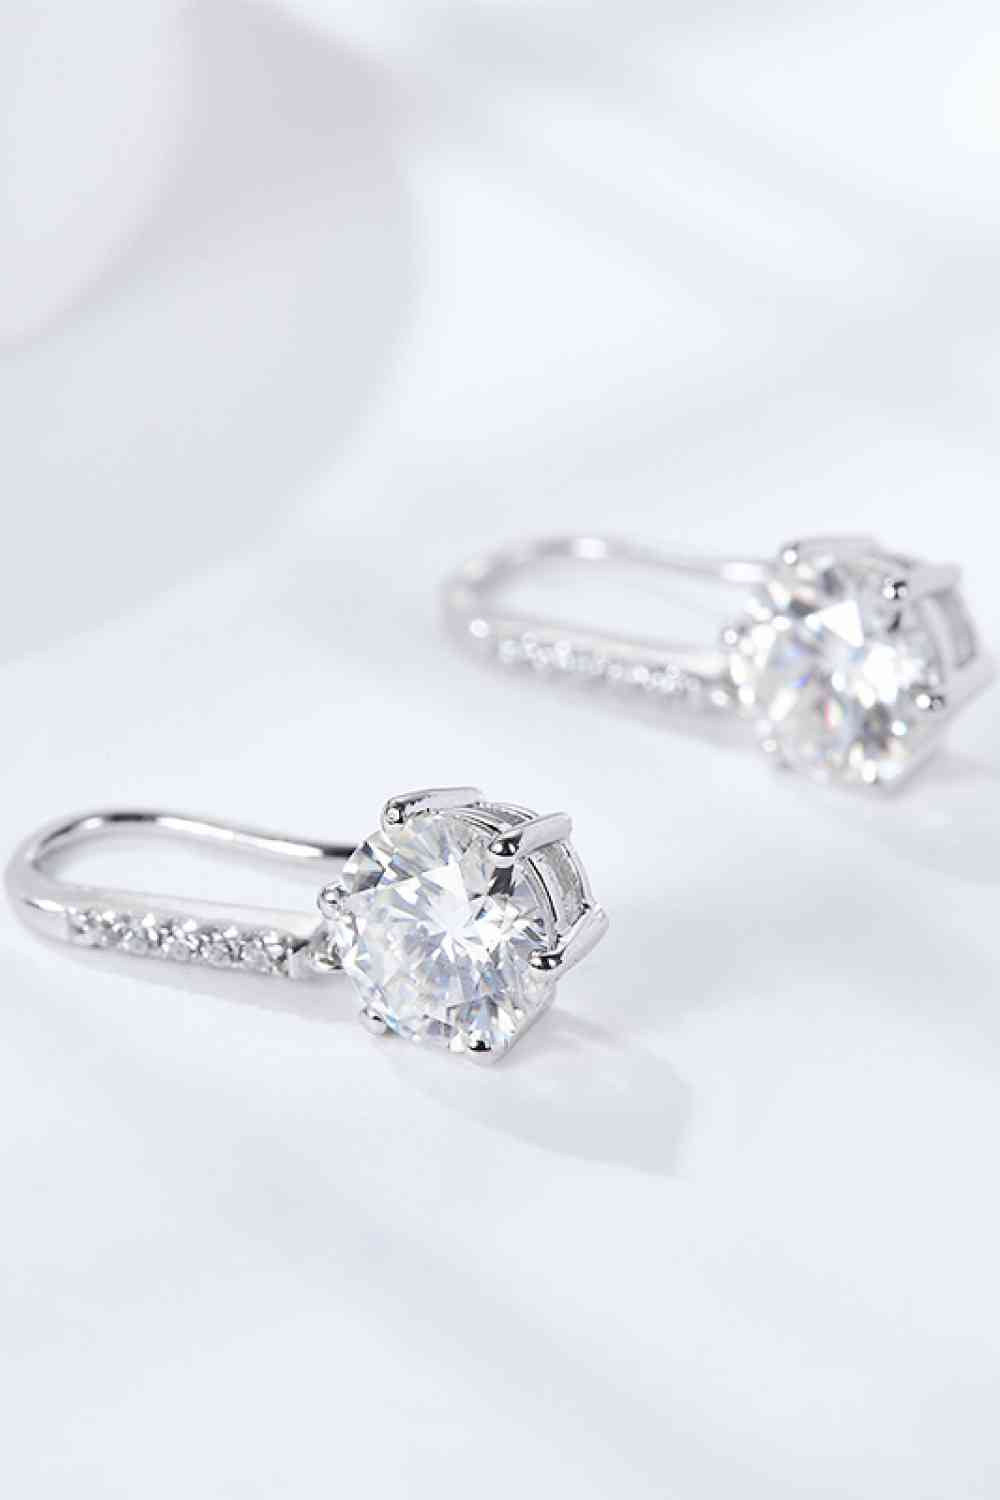 a pair of diamond earrings on a white surface